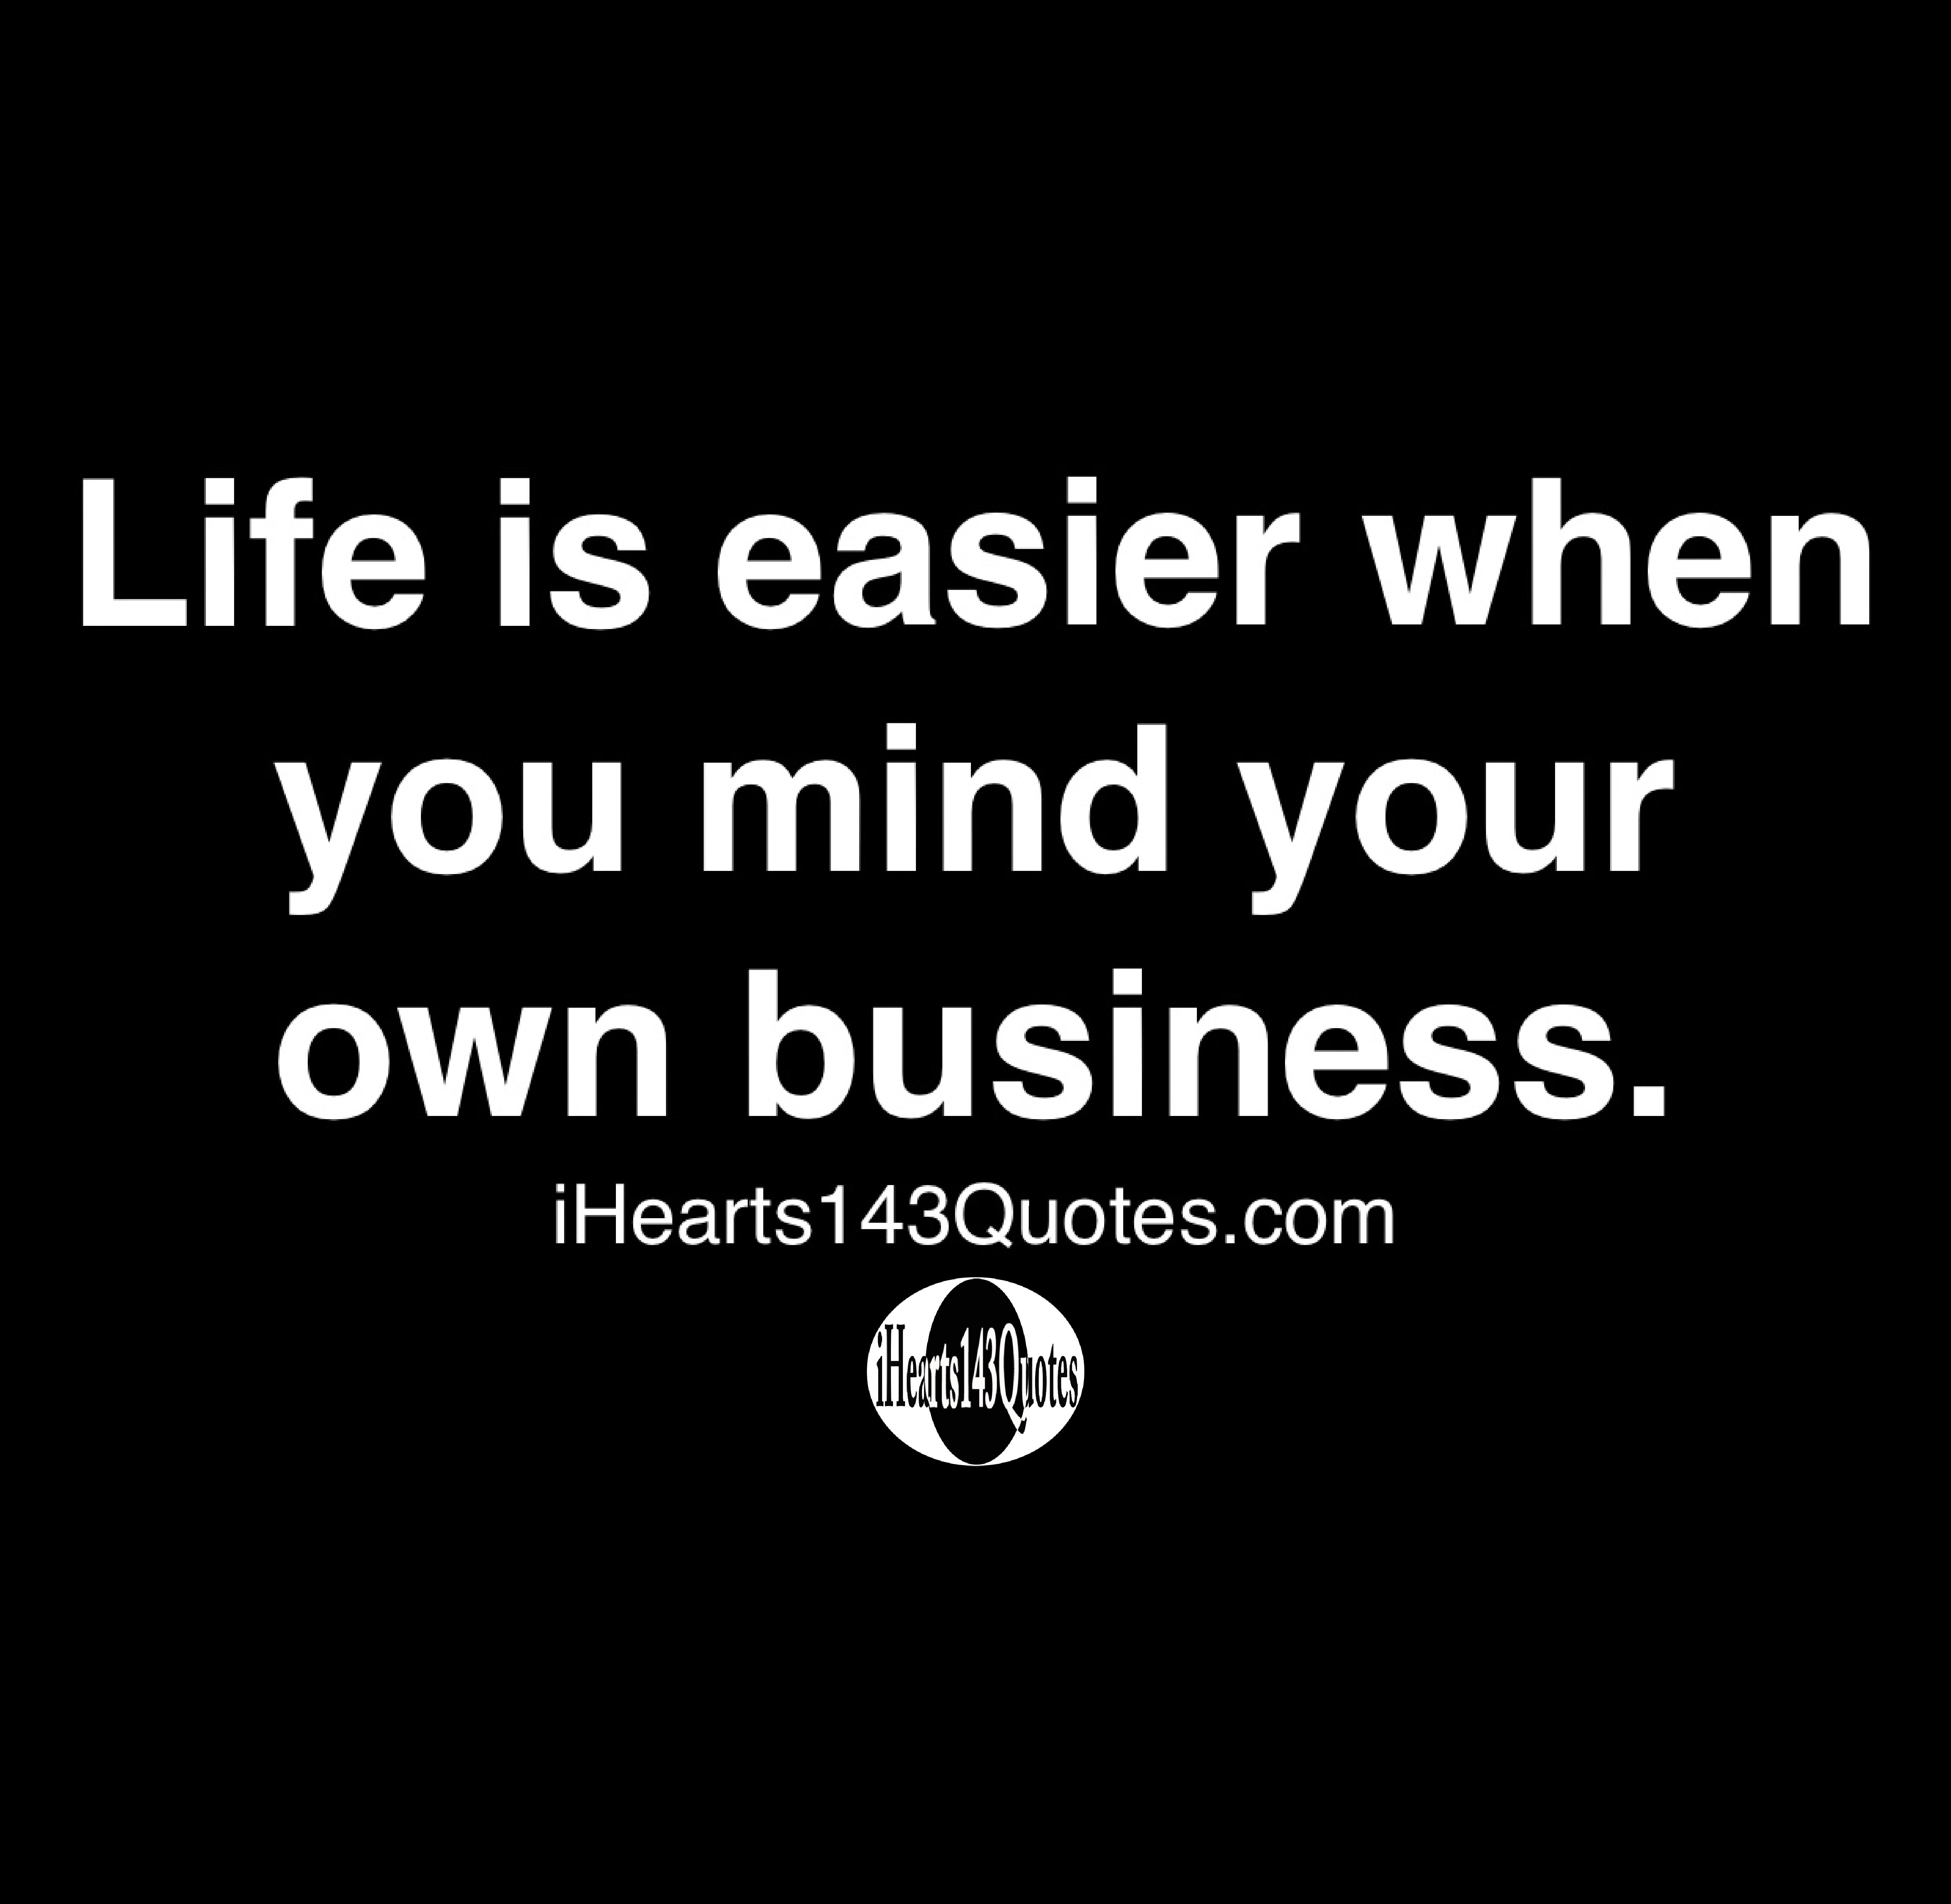 Life Is Easier When You Mind Your Own Business - Quotes - Ihearts143Quotes